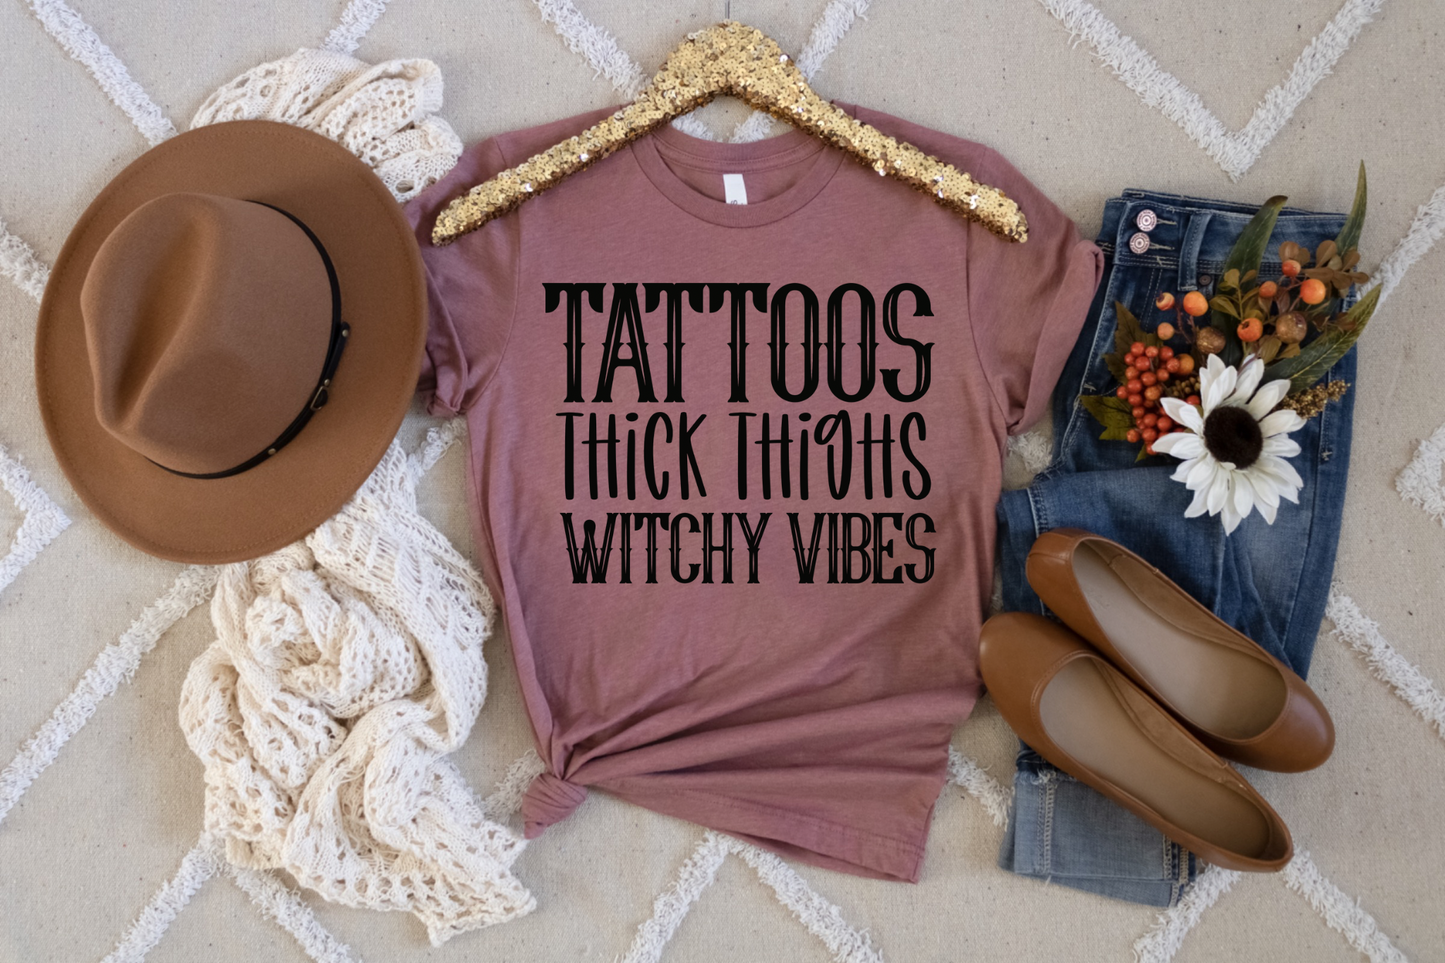 Tattoos thick thighs and witchy vibes